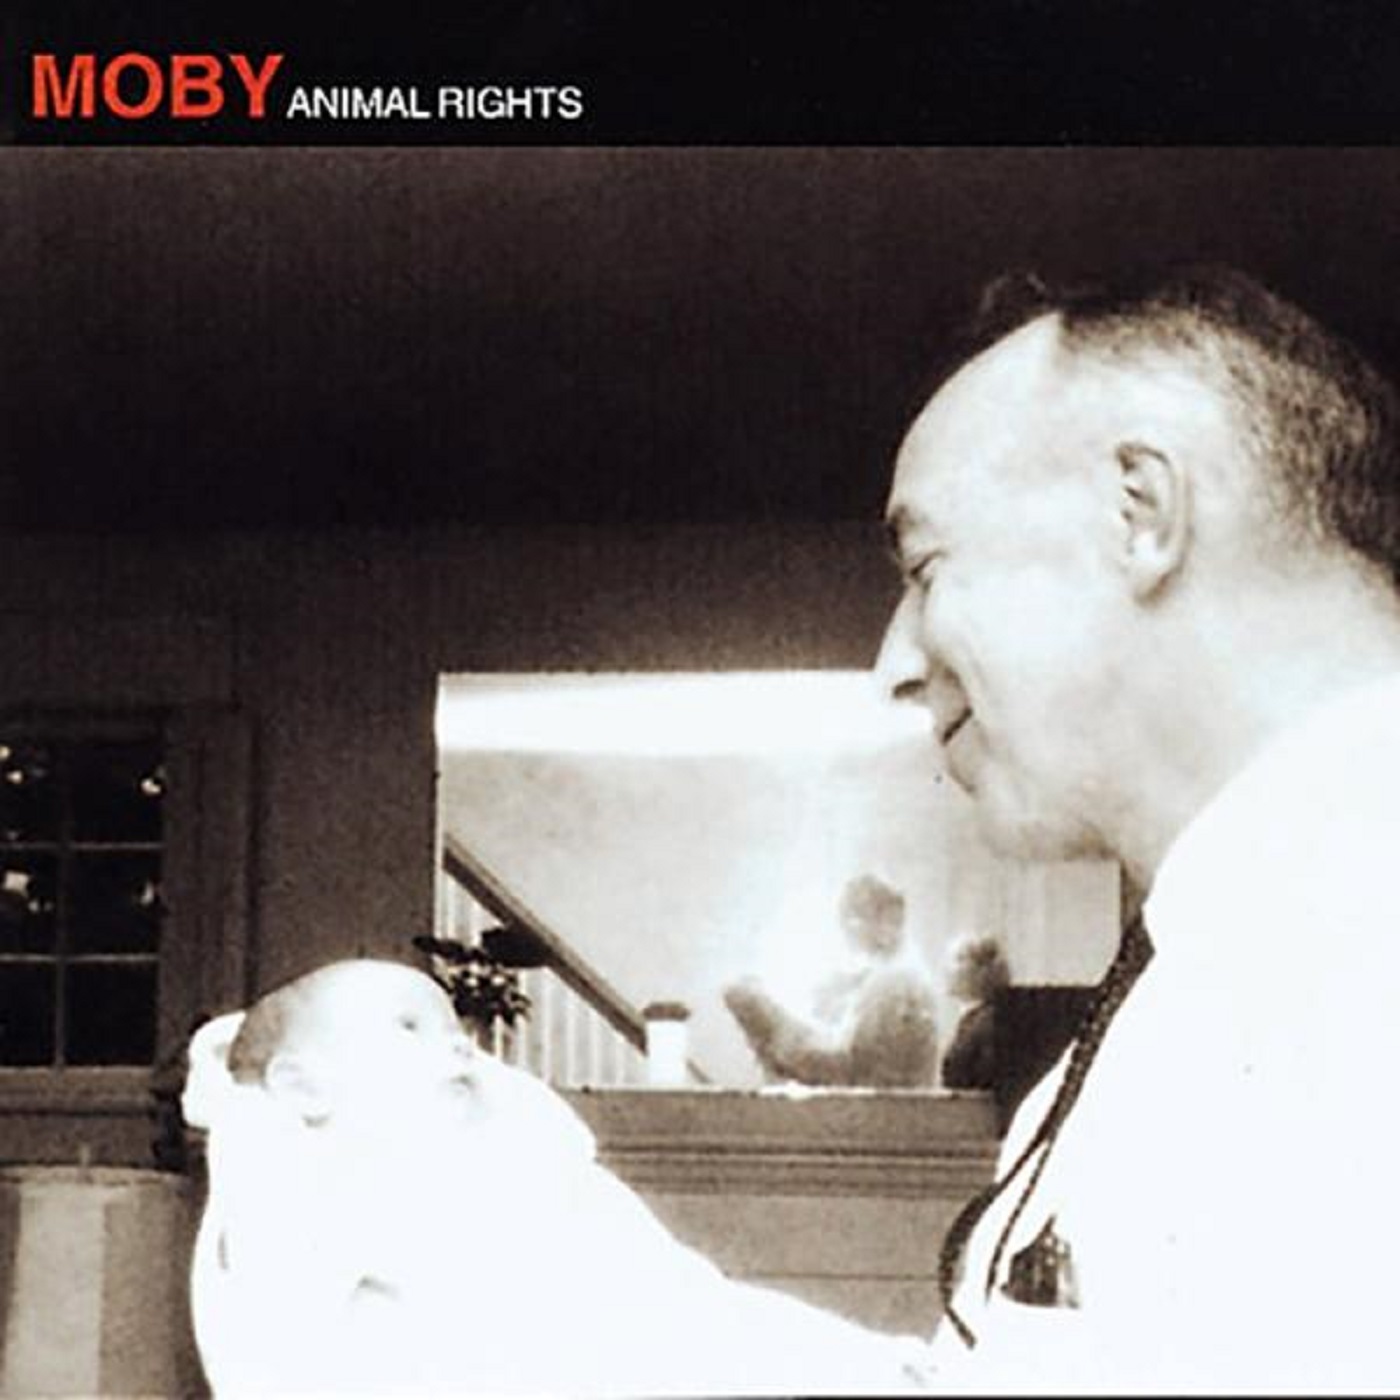 Moby’s “Animal Rights” (with Alf)